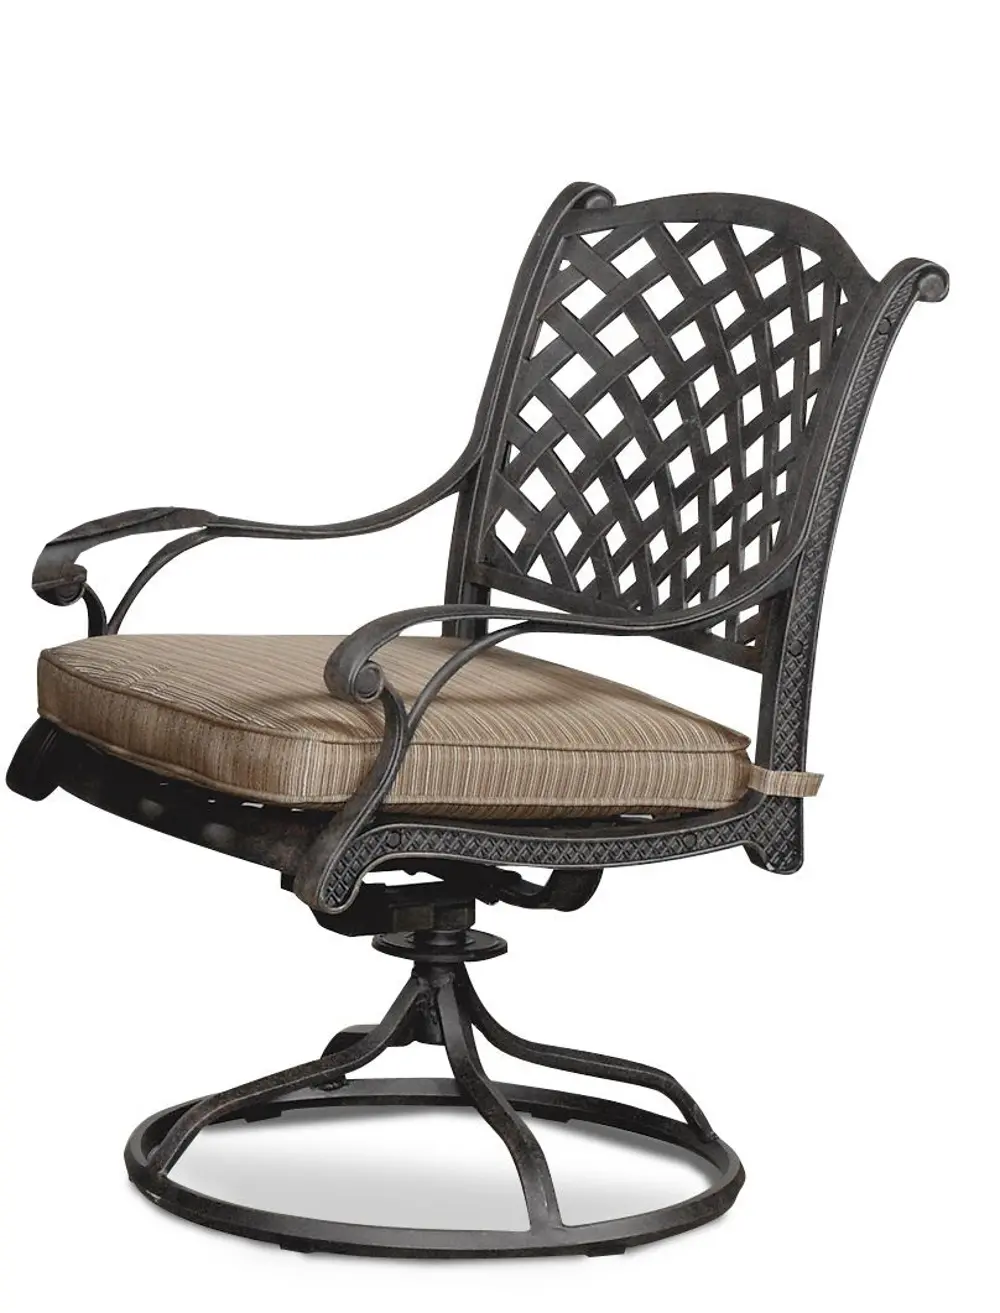 Outdoor Swivel Patio Chair - Moab-1